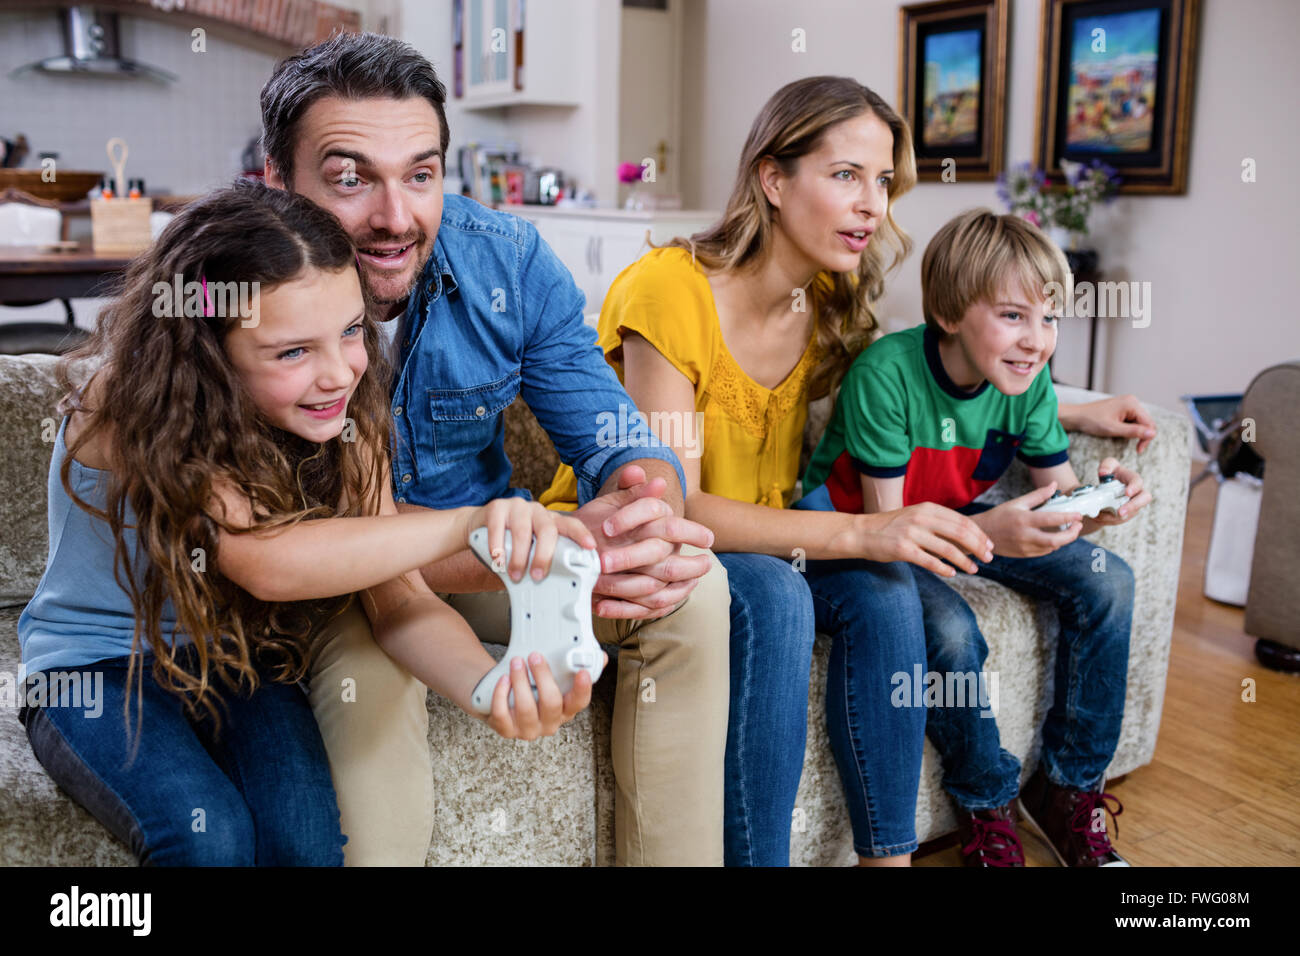 Family sitting on sofa and playing video game Stock Photo